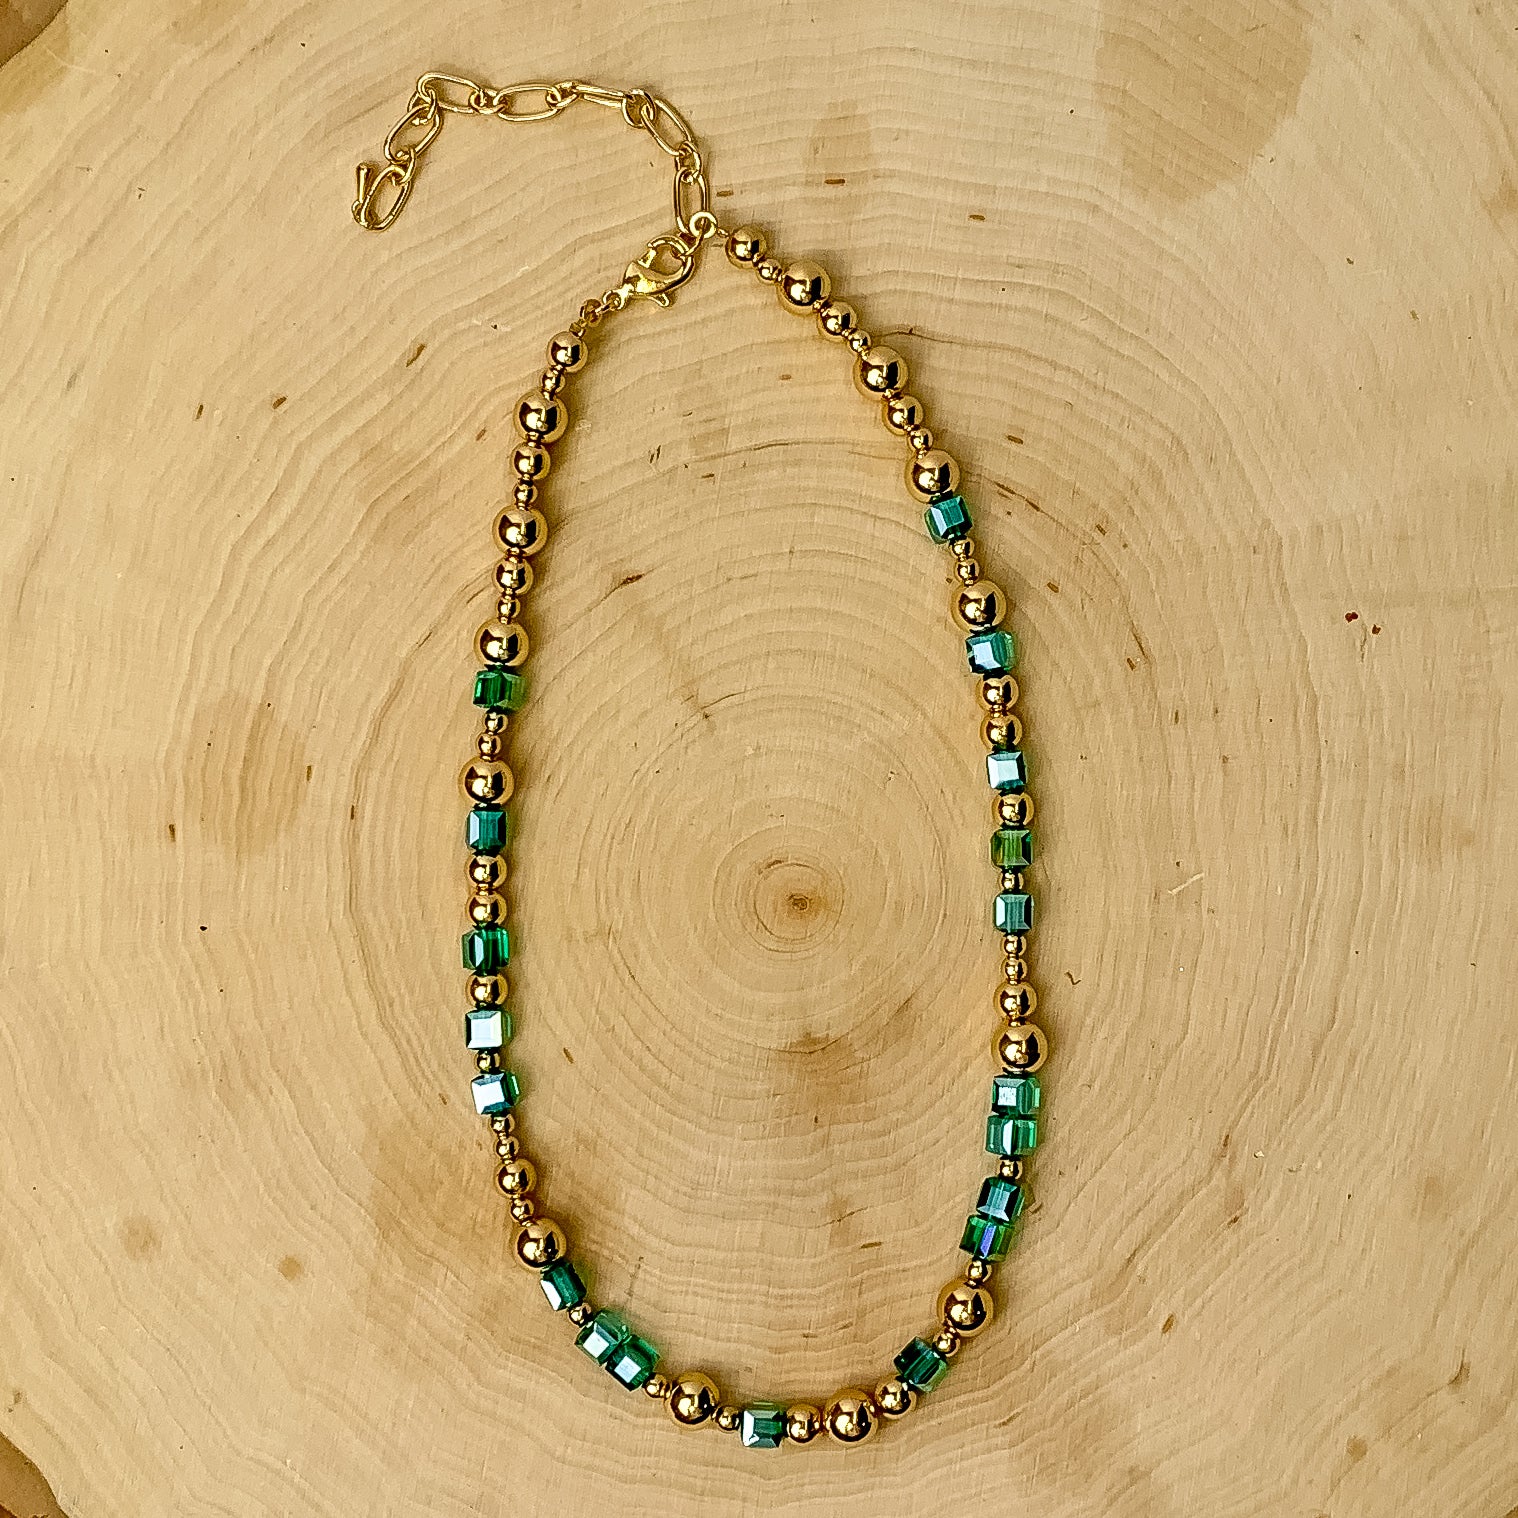 This necklace has gold tone and mint green beads. It is placed against a wooden background.